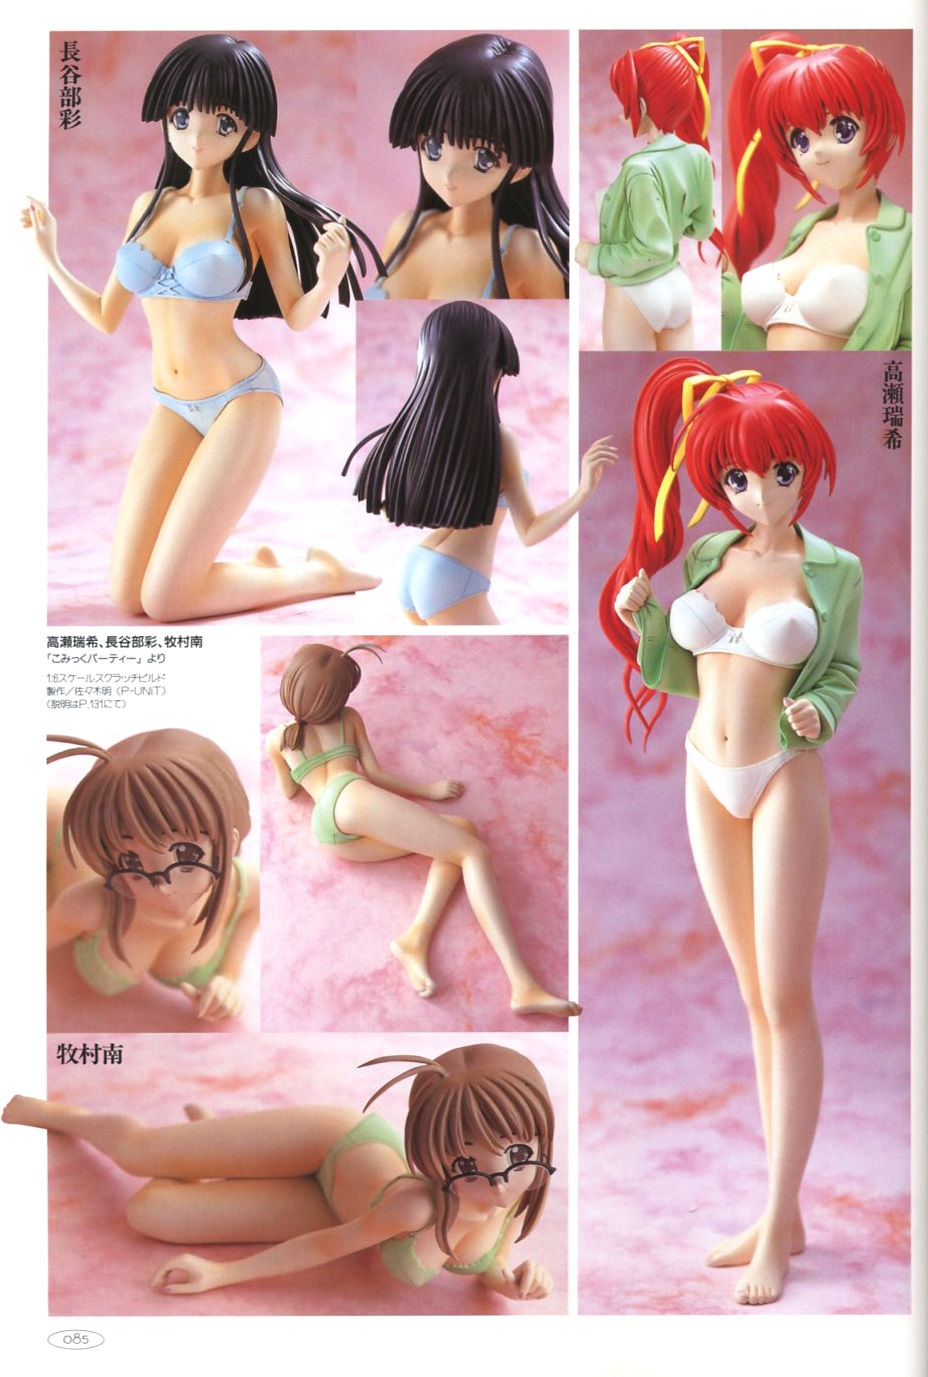 Hobby Japan Mook All That Figure 2001 73